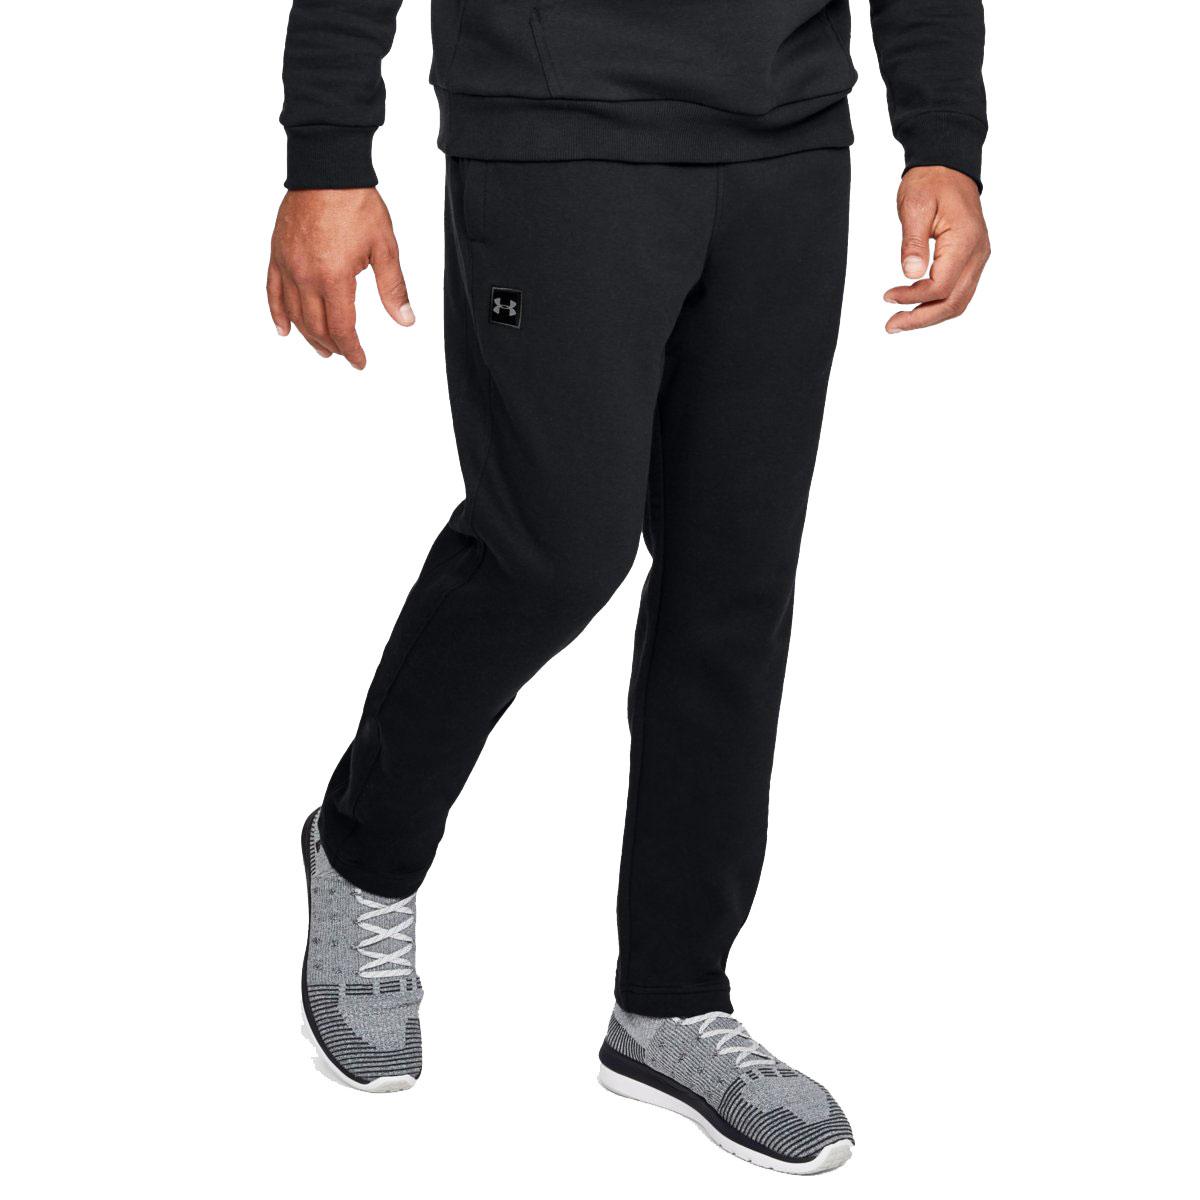 Under Armour Mens Rival Fleece Pants for $18